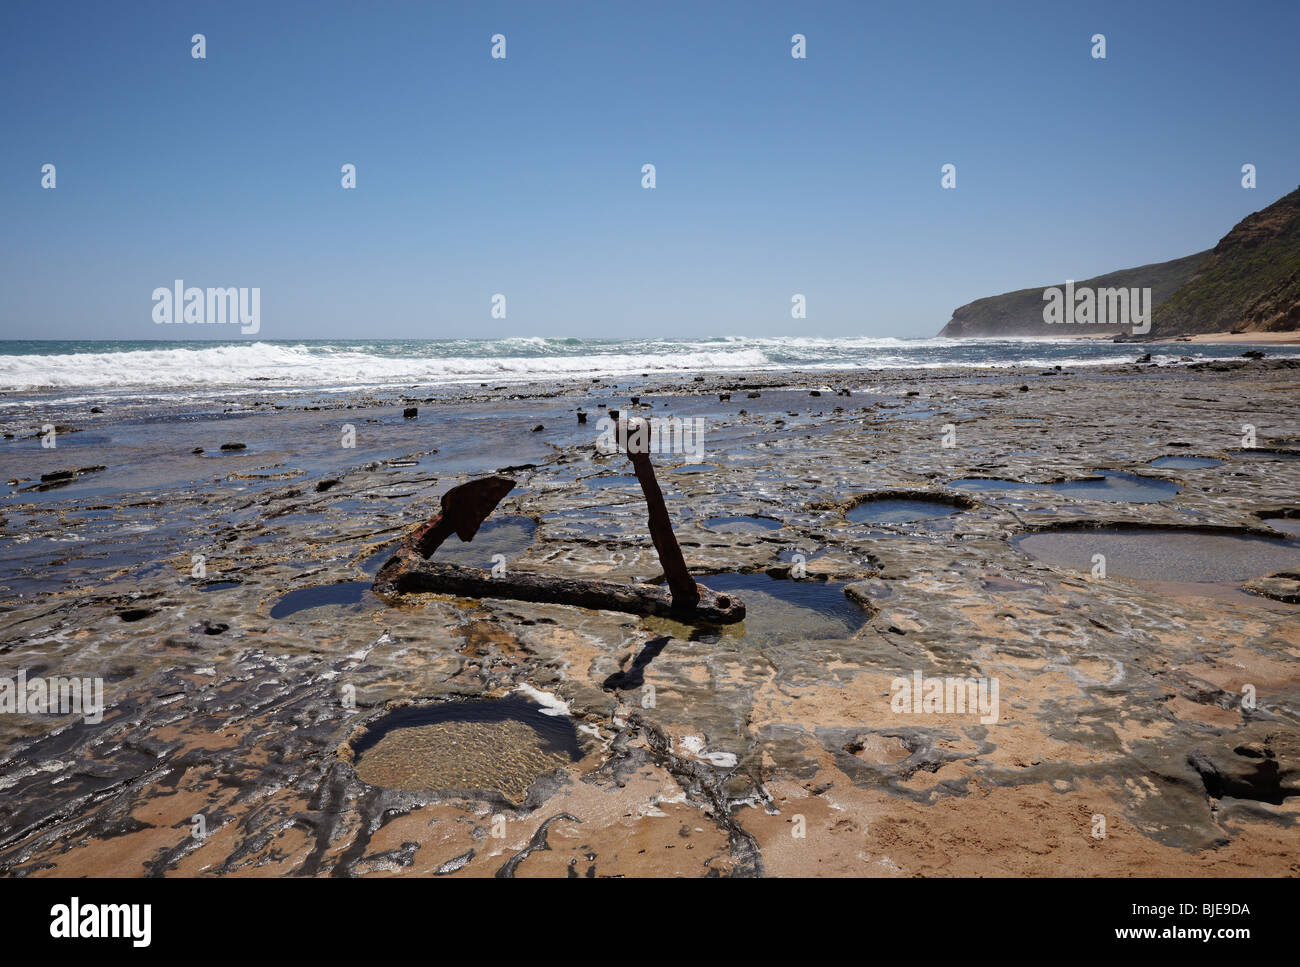 The anchor from the 1869 Marie Gabrielle shipwreck, Moonlight Head, Great Ocean Road, Victoria, Australia Stock Photo